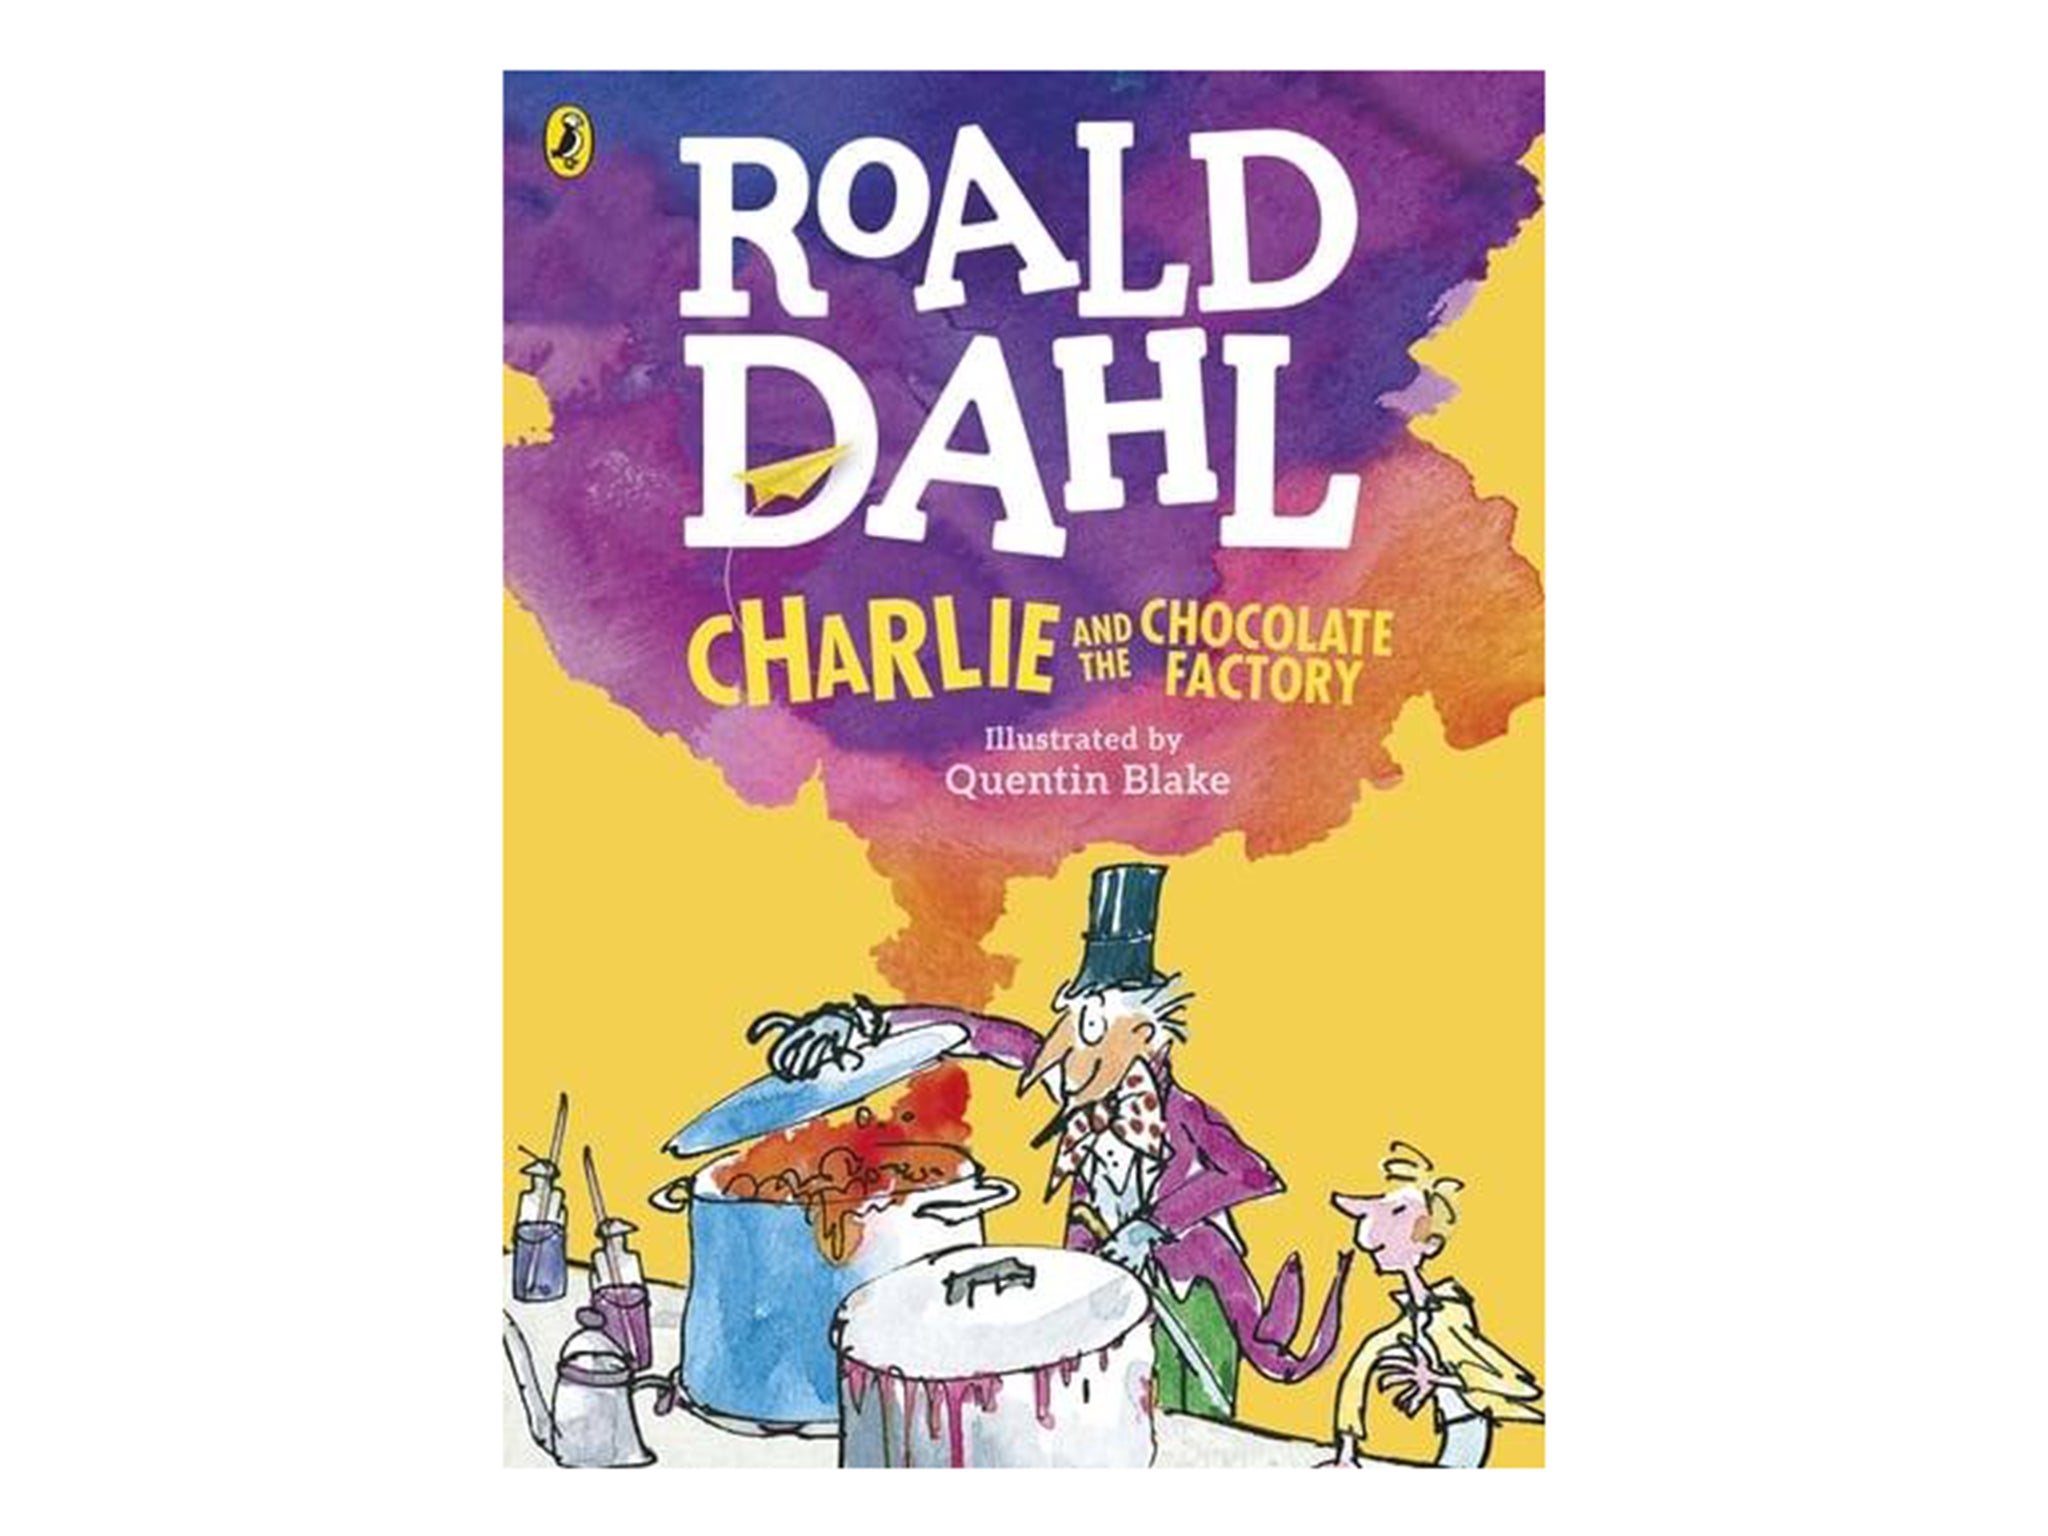 Charlie and the Chocolate Factory’ by Roald Dahl day indybest .jpg